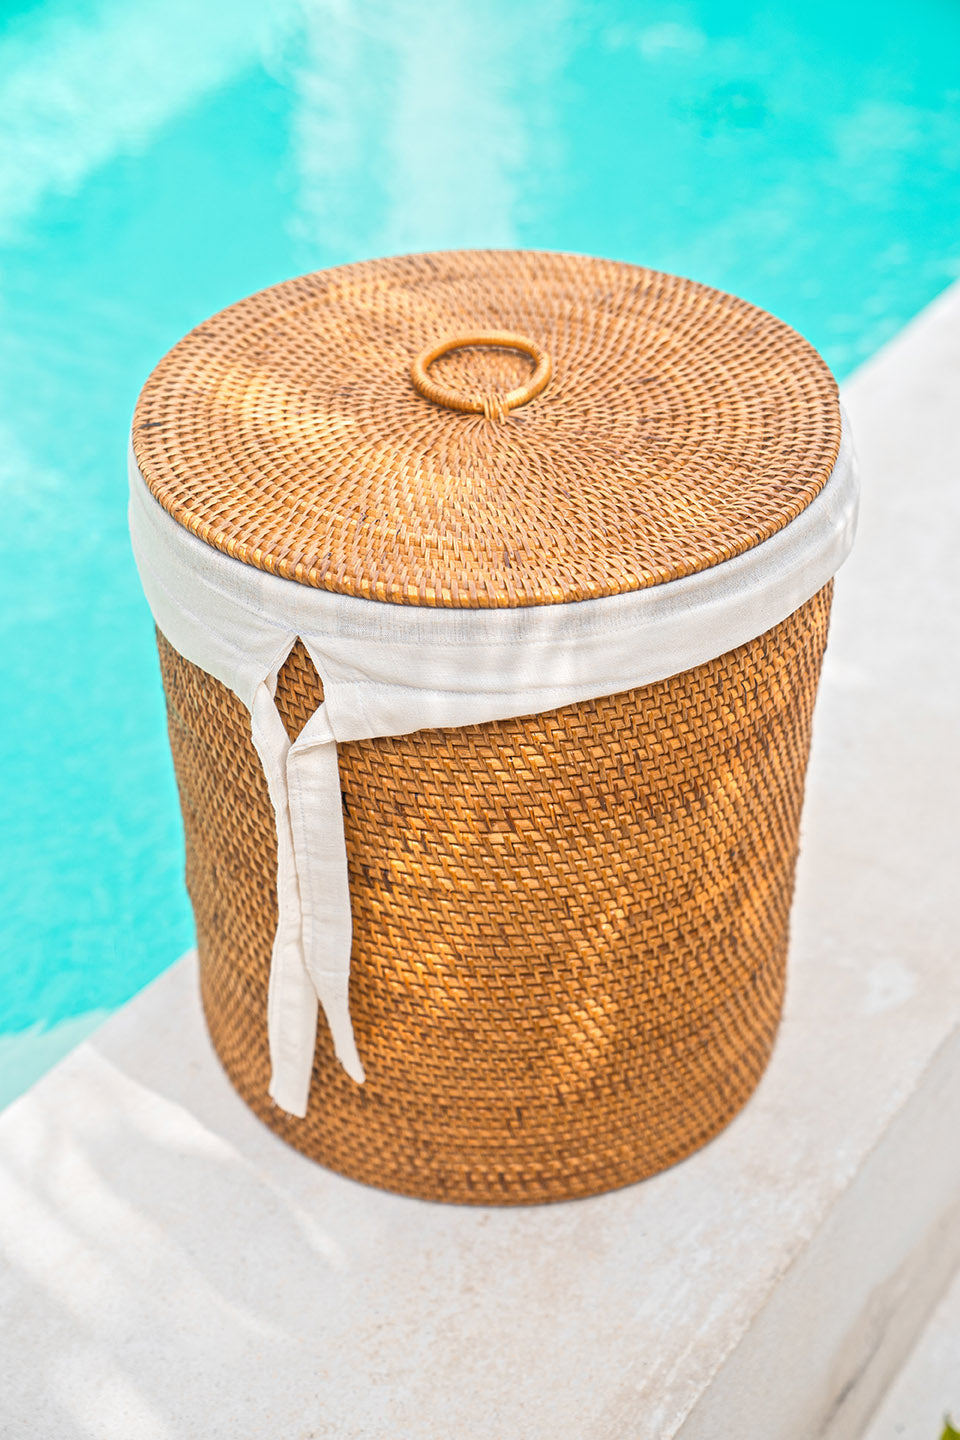 Honey-Brown Rattan Hamper with Lining and Lid Basket